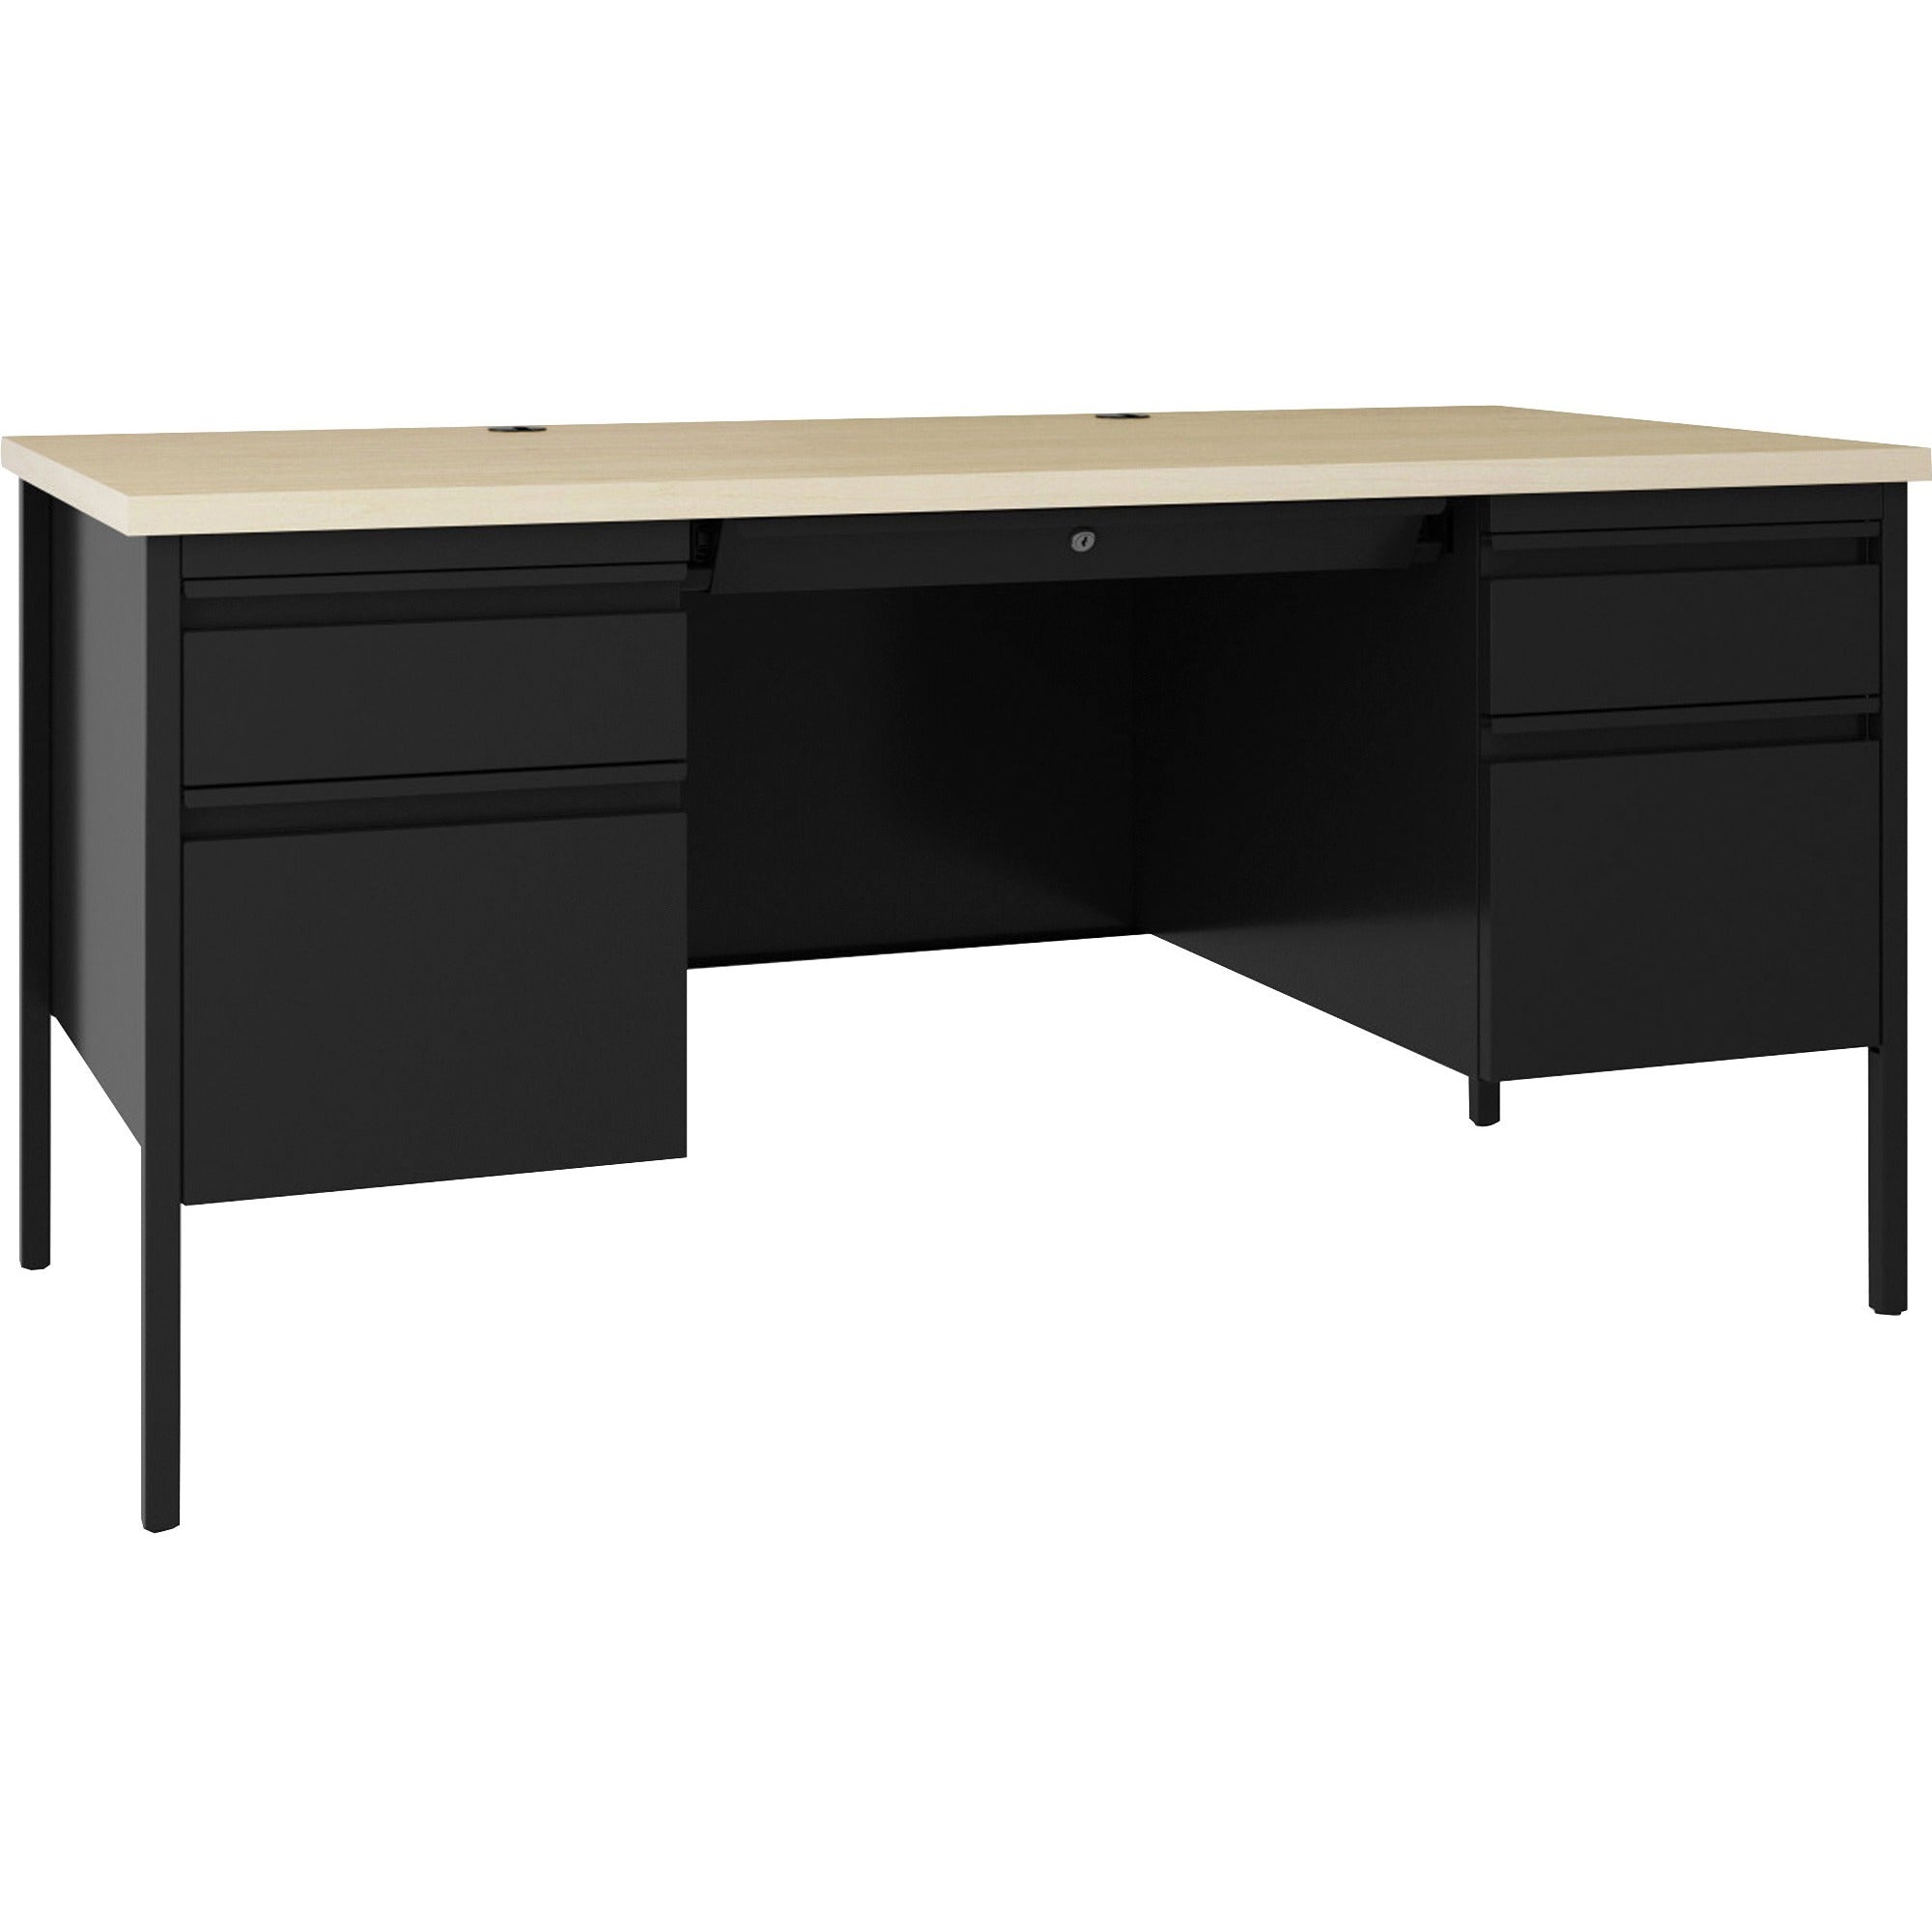 lorell-fortress-series-double-pedestal-desk-60-x-29530--11-top-08-modesty-panel-file-drawers-double-pedestal-square-edge-material-steel-finish-black_llr60930 - 1